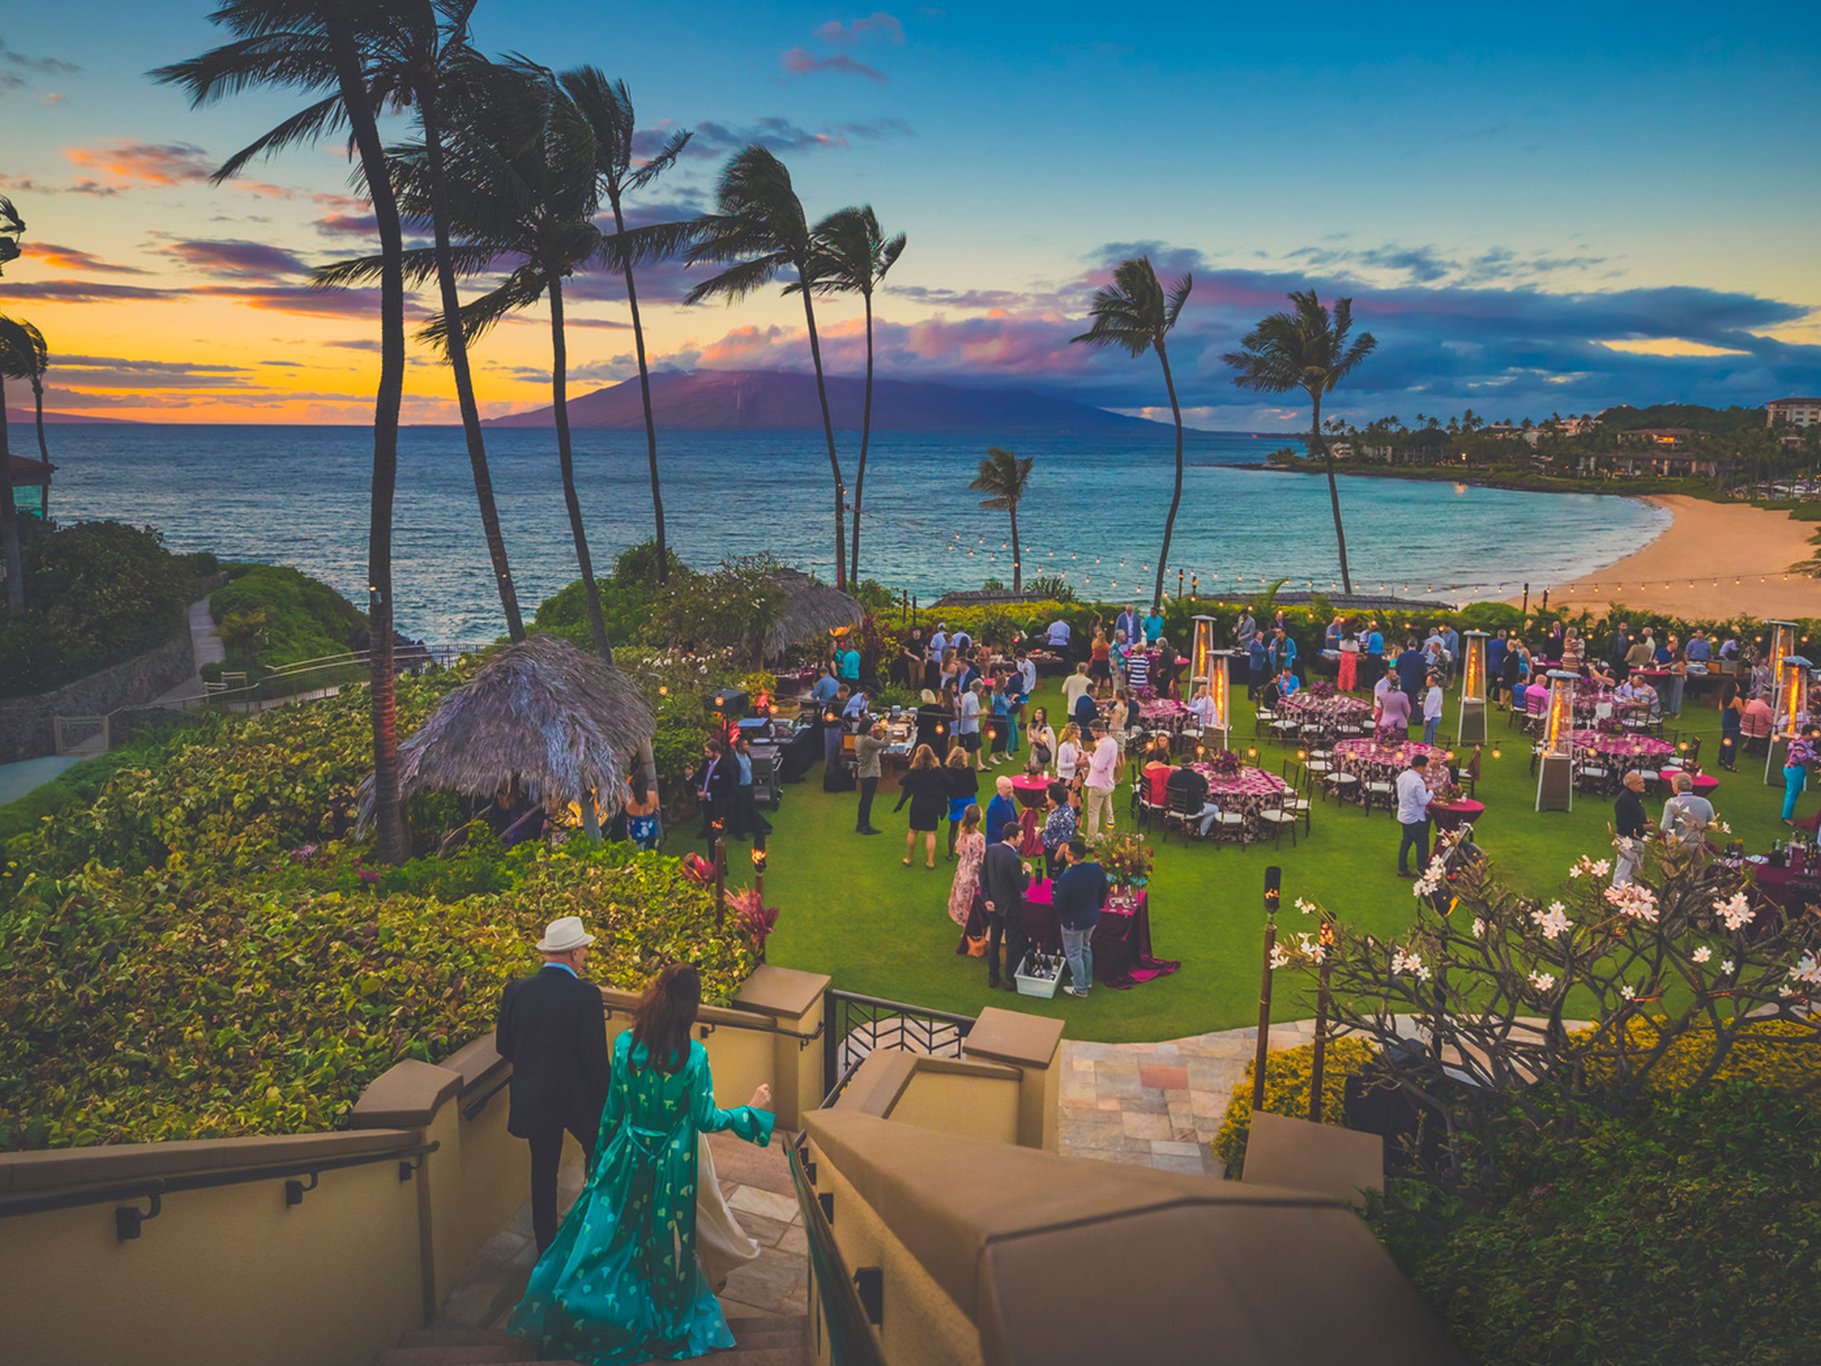 Labor Day Weekend Wine and Food Event at the Four Seasons Maui at Wailea.